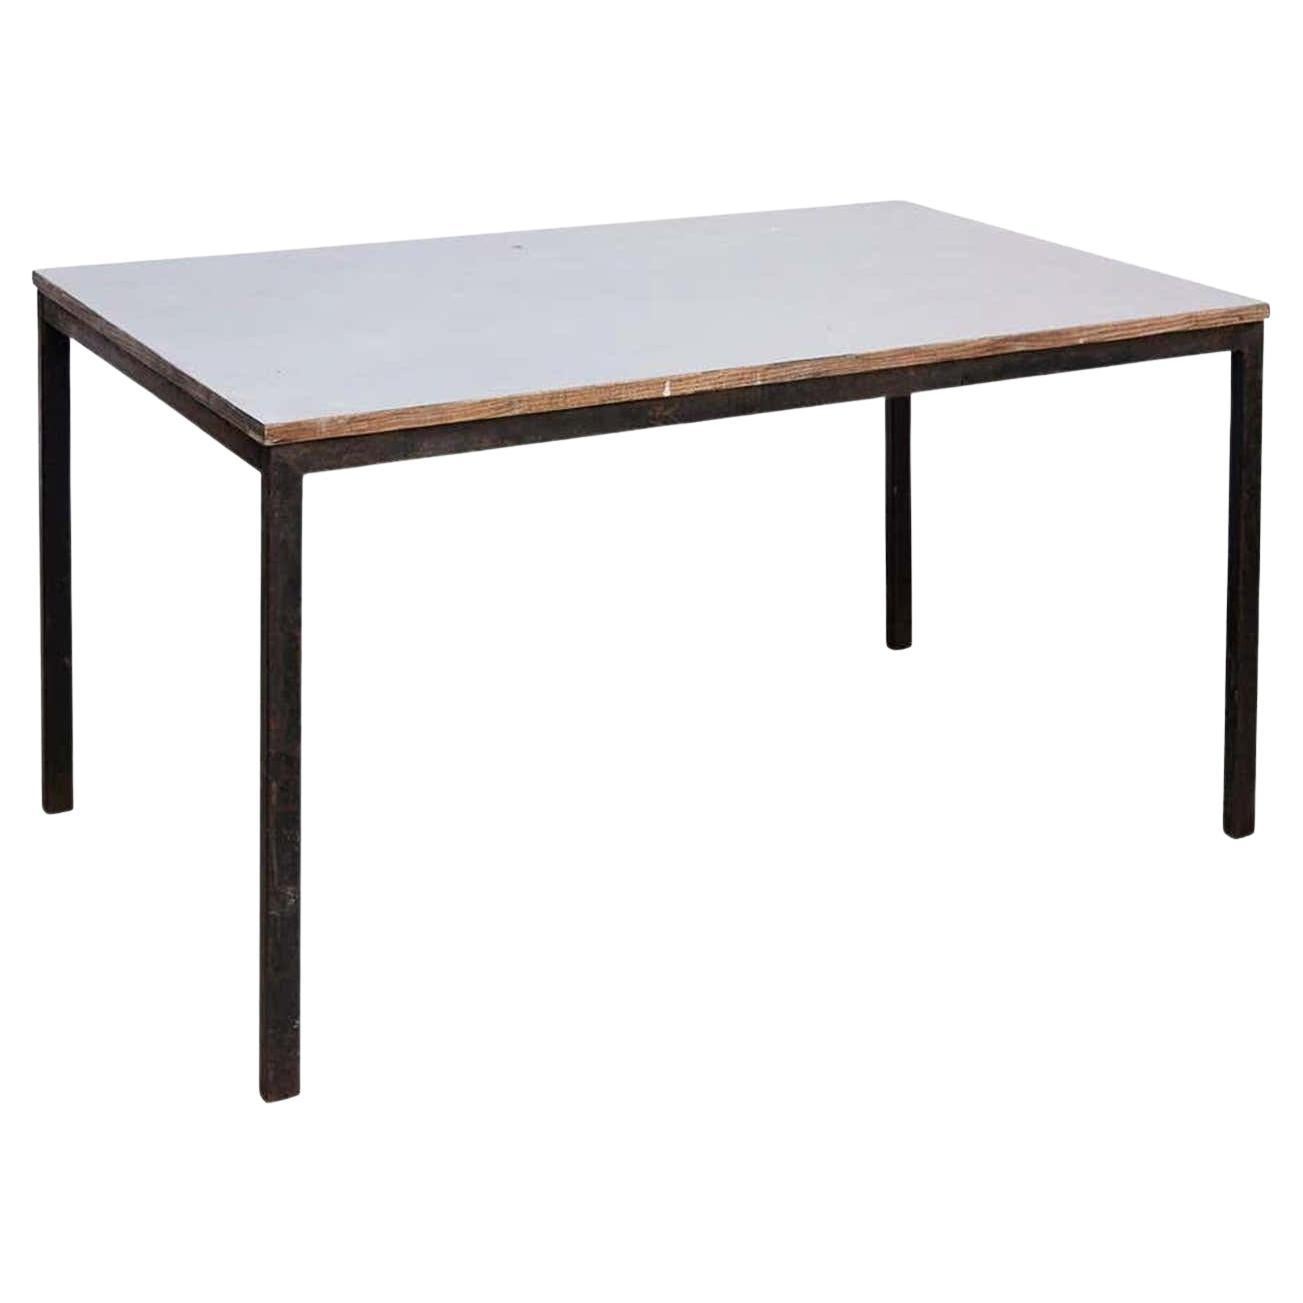 Charlotte Perriand, Mid-Century Modern, Wood Metal Cansado Table, circa 1950 For Sale